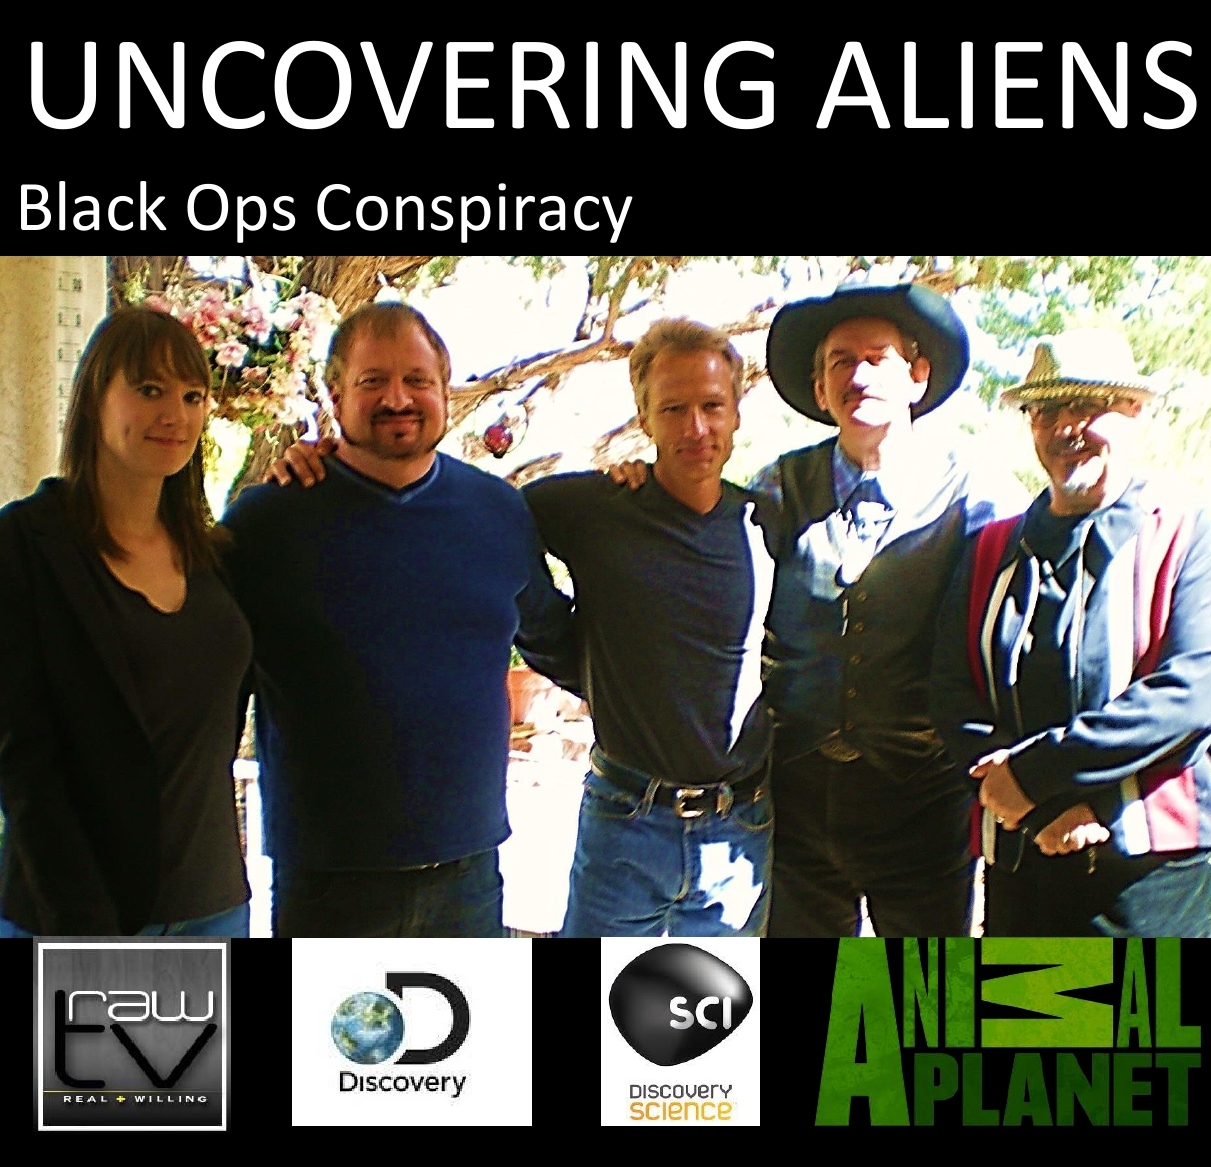 George Pilgrim on Uncovering Aliens-Black Ops Conspiracy PILOT PREMIERES ON A 'NEW CHANNEL' DISCOVERY's SCIENCE CHANNEL and as seen on Animal Planet. Check your local listings!